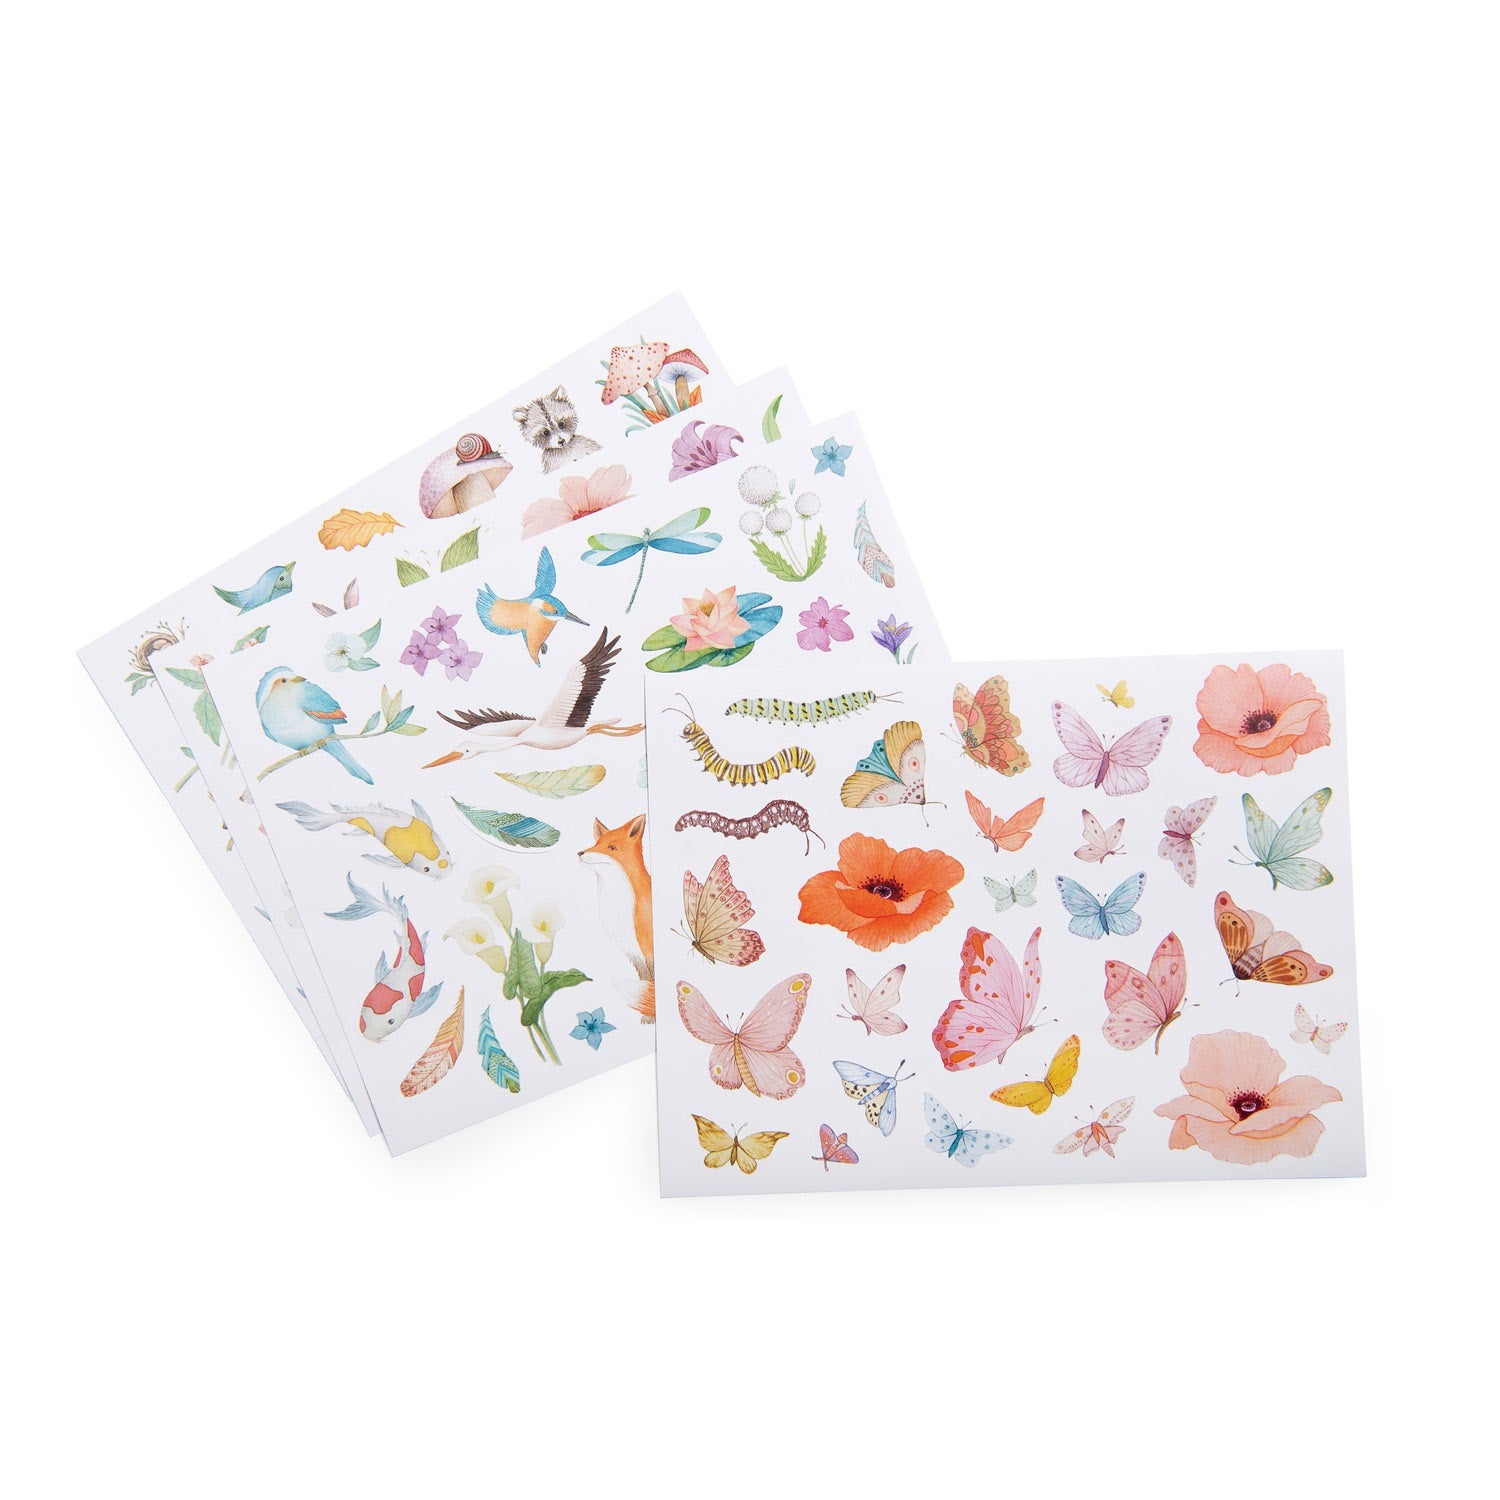 Les Rosalies - Pack of 108 Stickers